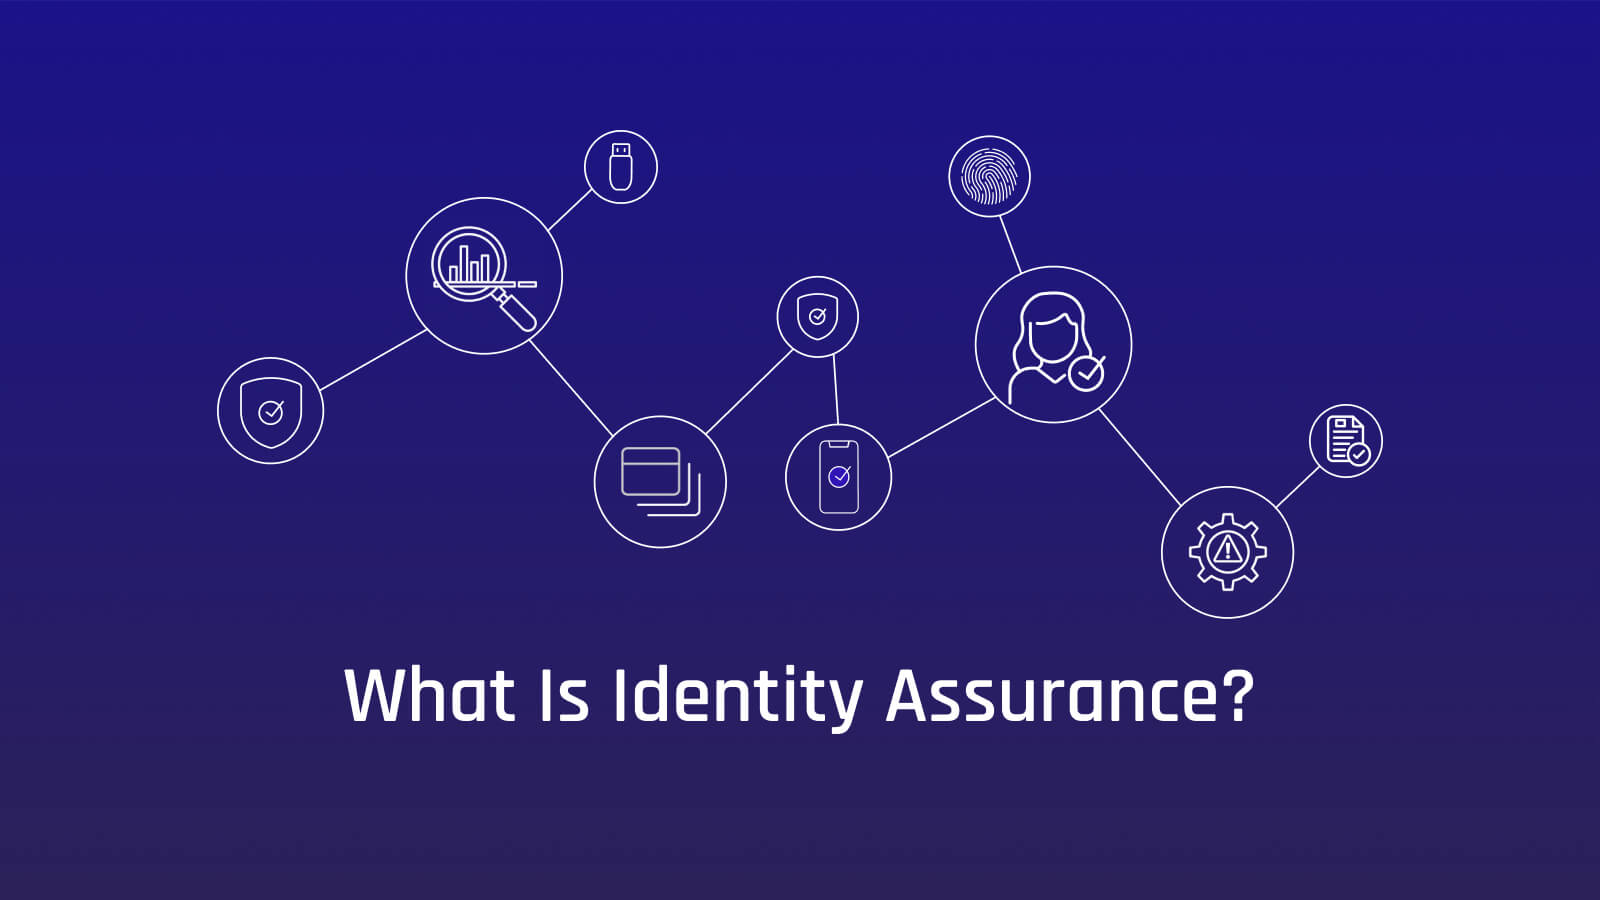 What Is Identity Assurance and Why It's Needed